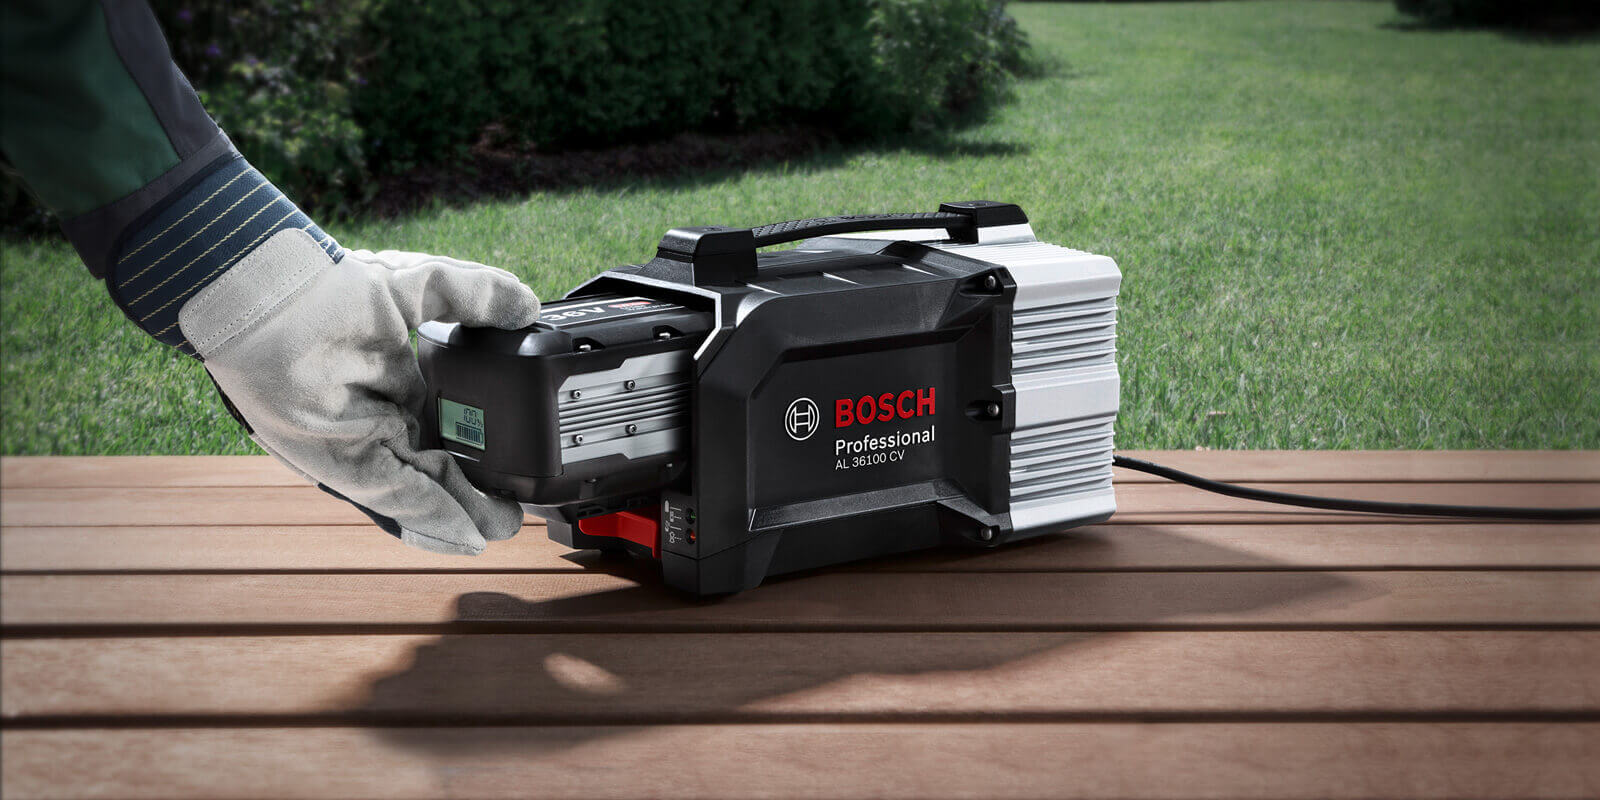 NEW! Professional cordless garden tools from Bosch Professional